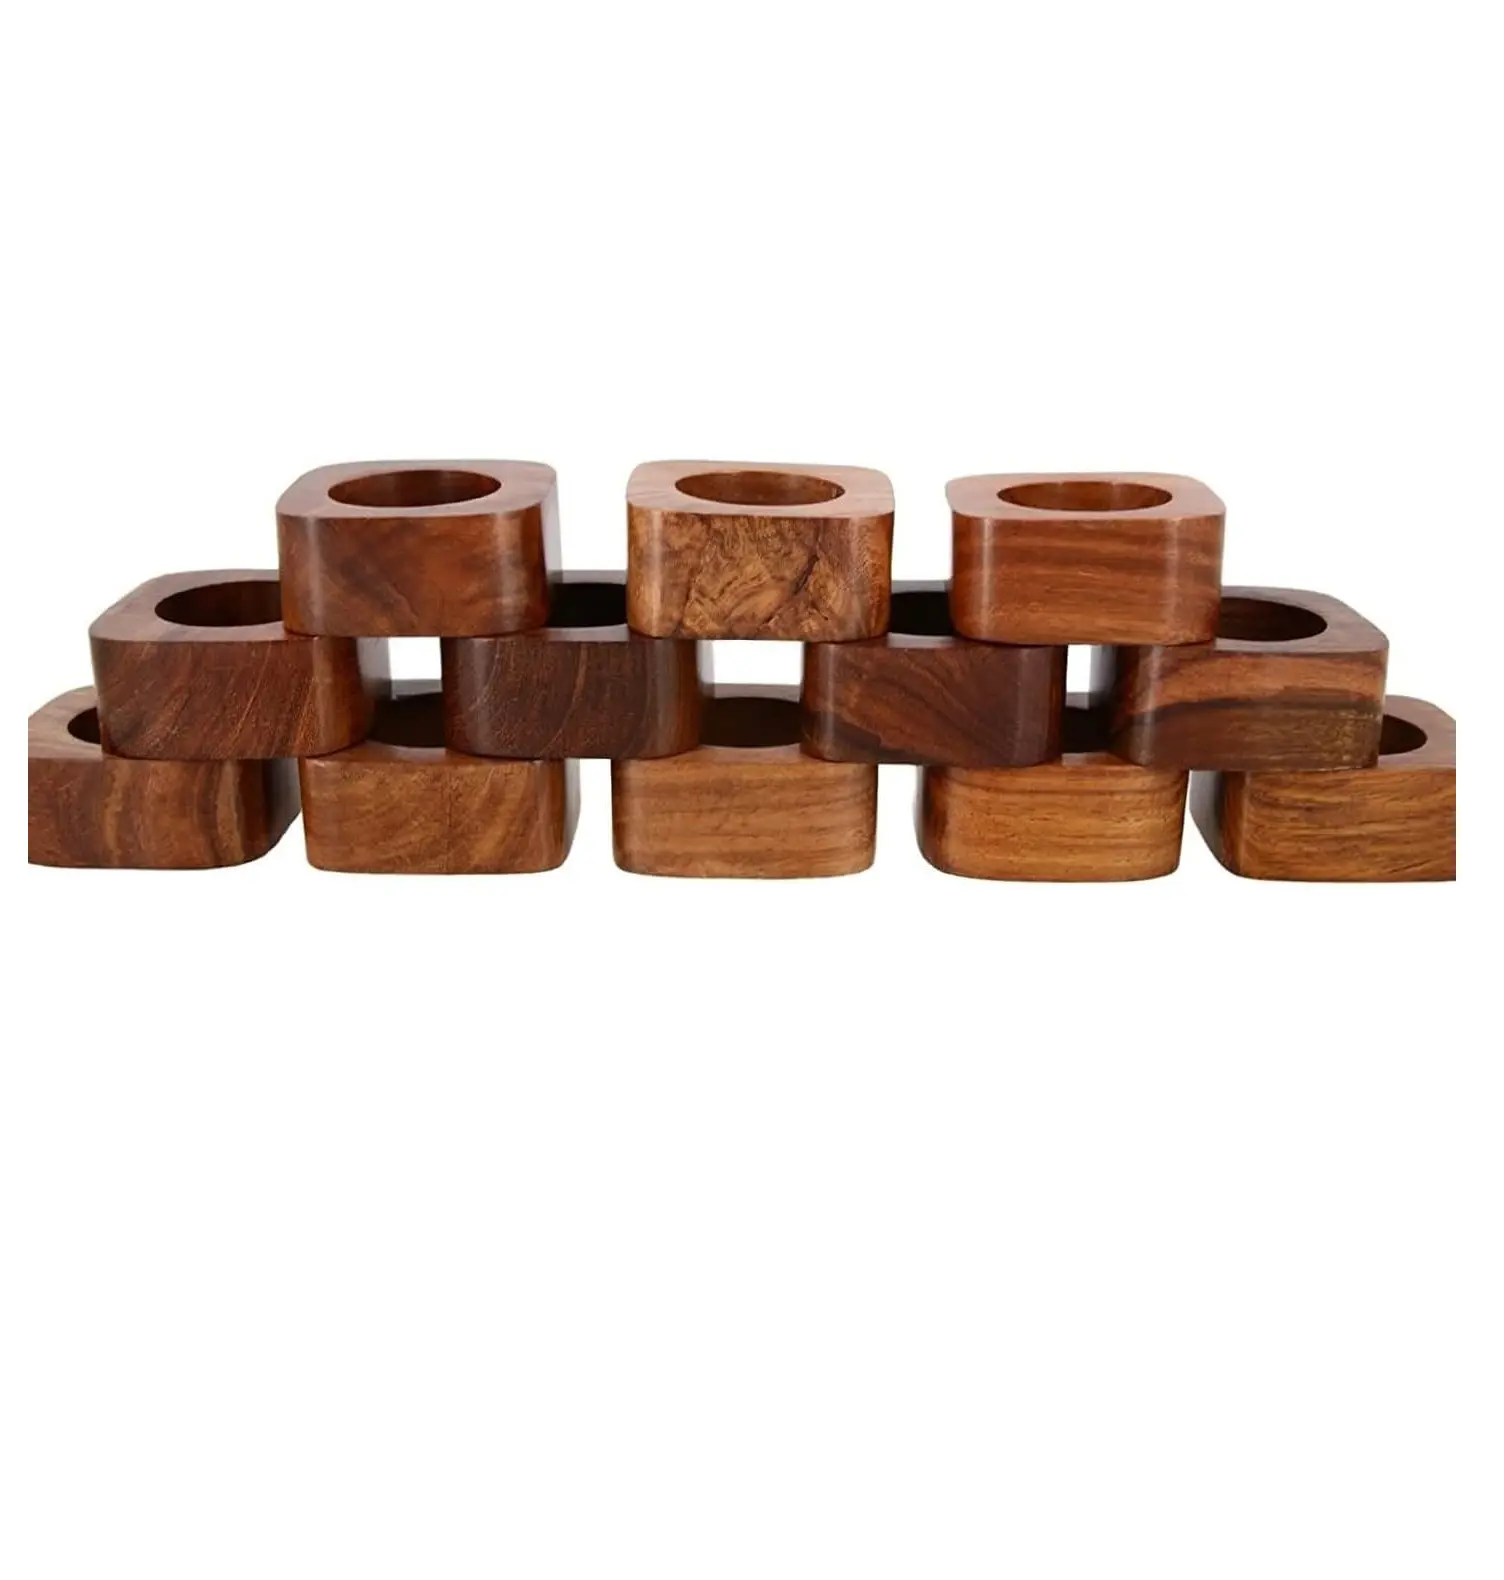 Wooden Napkin Ring Set of 12 Artisan Crafted Holders Table Dinner Party Decorations Gifts Decor (Style 2)